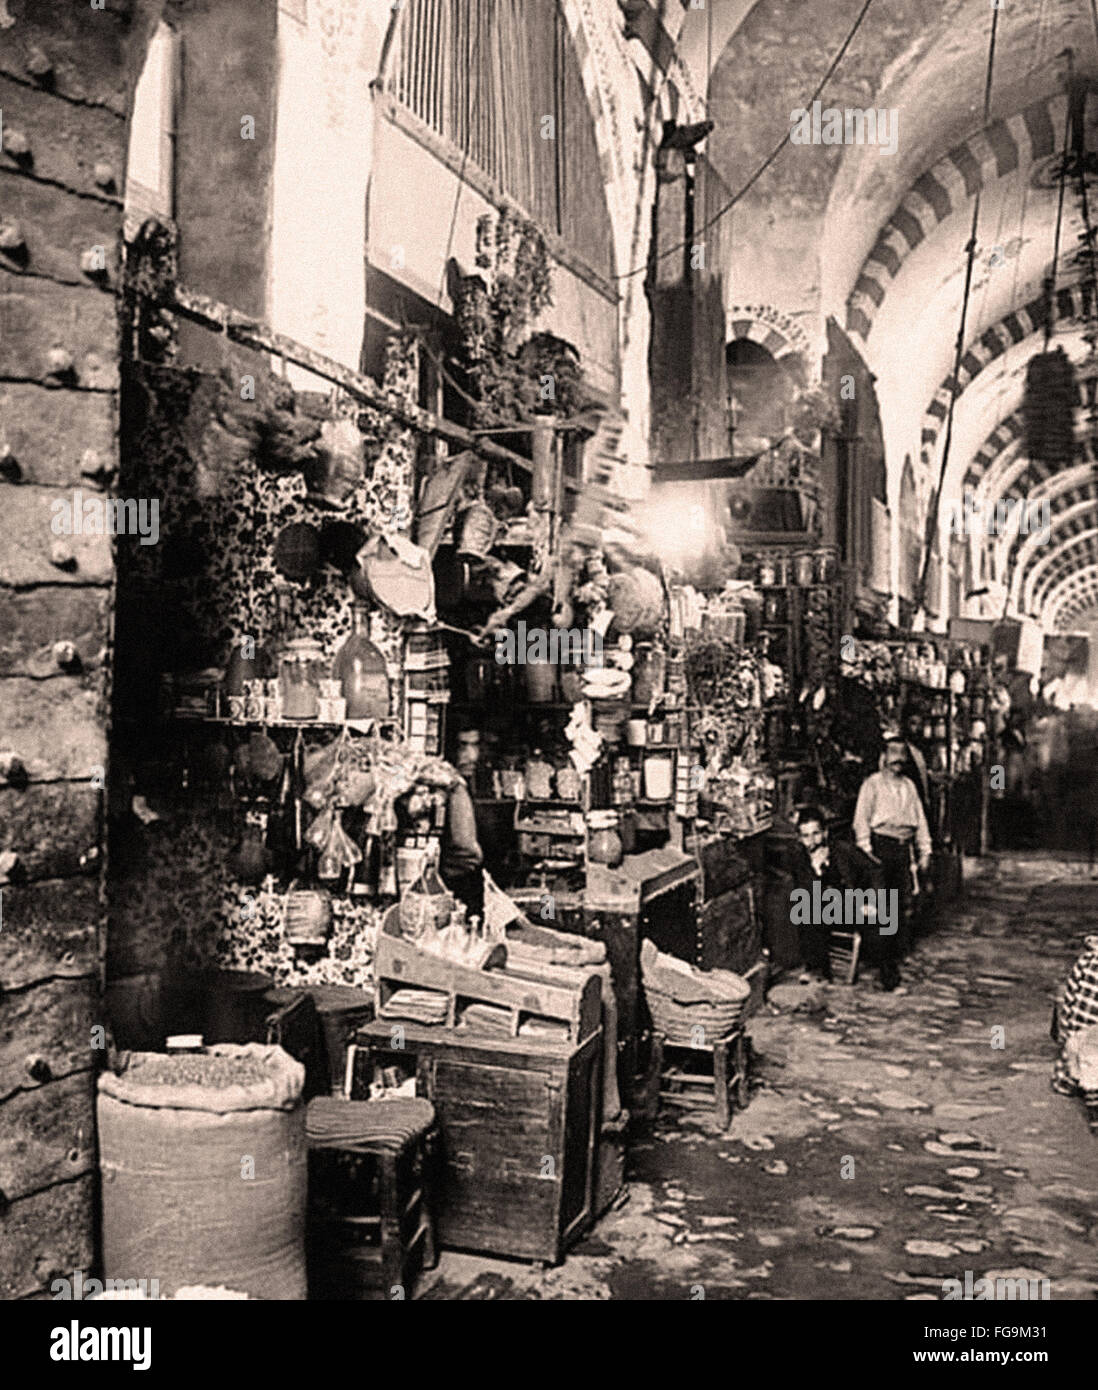 the Grand Bazaar of Istambul from the late 19th century Stock Photo